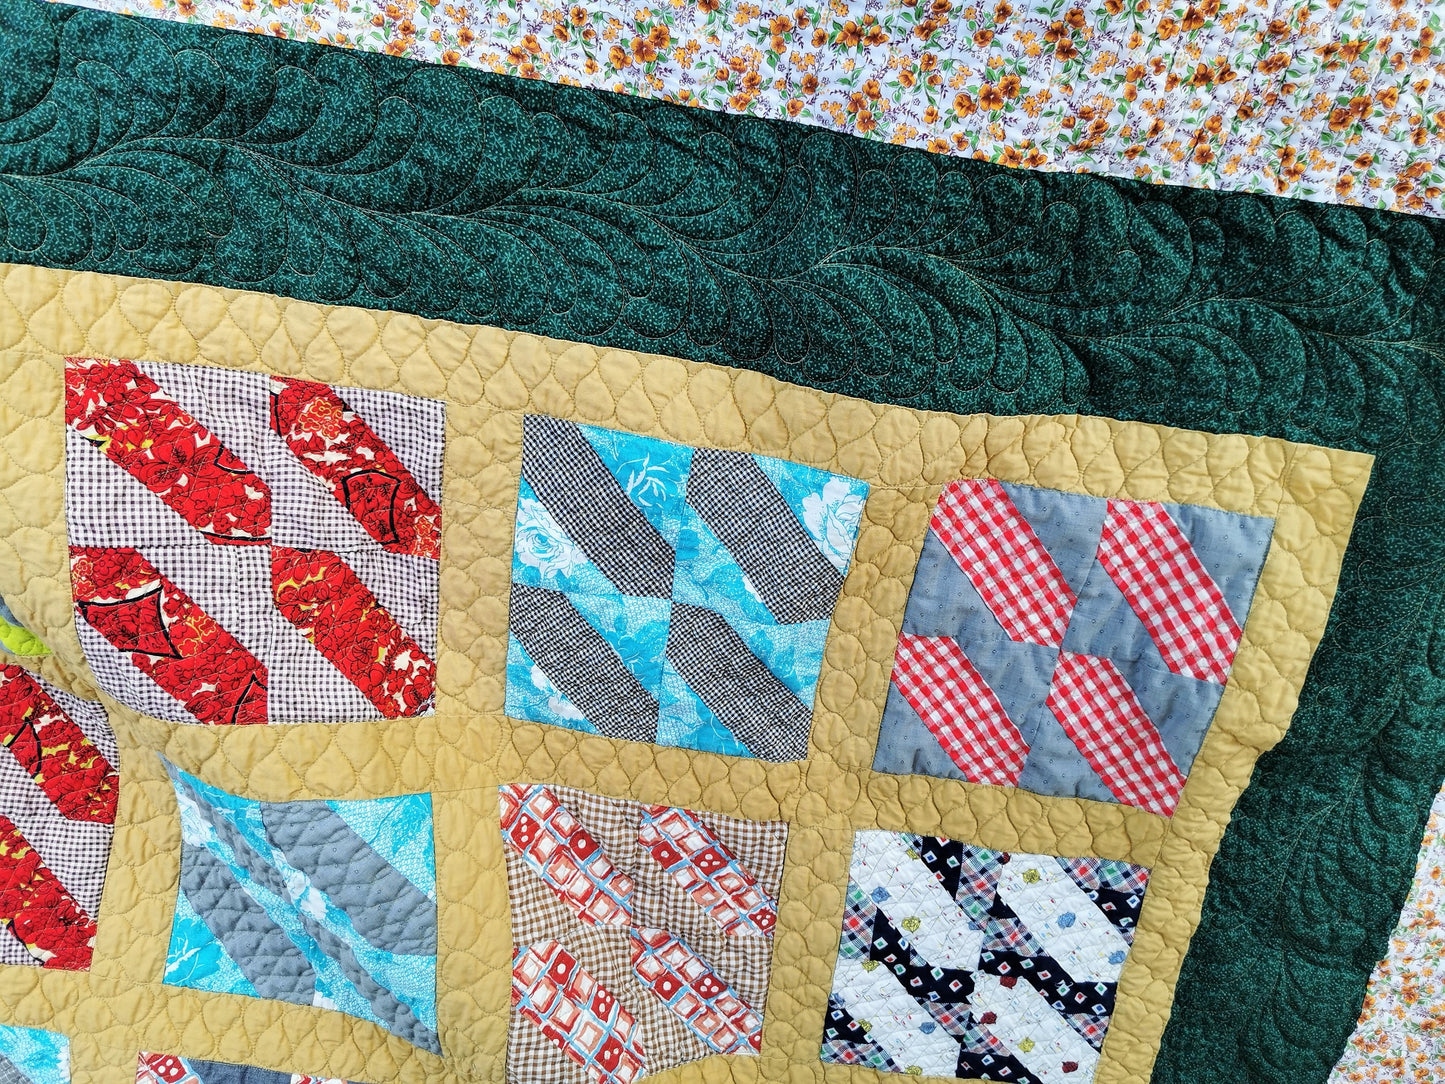 the vingage bed quilt is shown here with the dark green border prominent. I quilted freehand feathers on this border. You can see a bit of the floral outer border too. This has brown and burnt oragne flowers with green leaves on an ecru background. Also shown are more of the vintage patchwork blocks: brown gingham with a red slash, bright blue with gray gingham slash, gray with a red gingham slash, navy plaid with white slash. . 